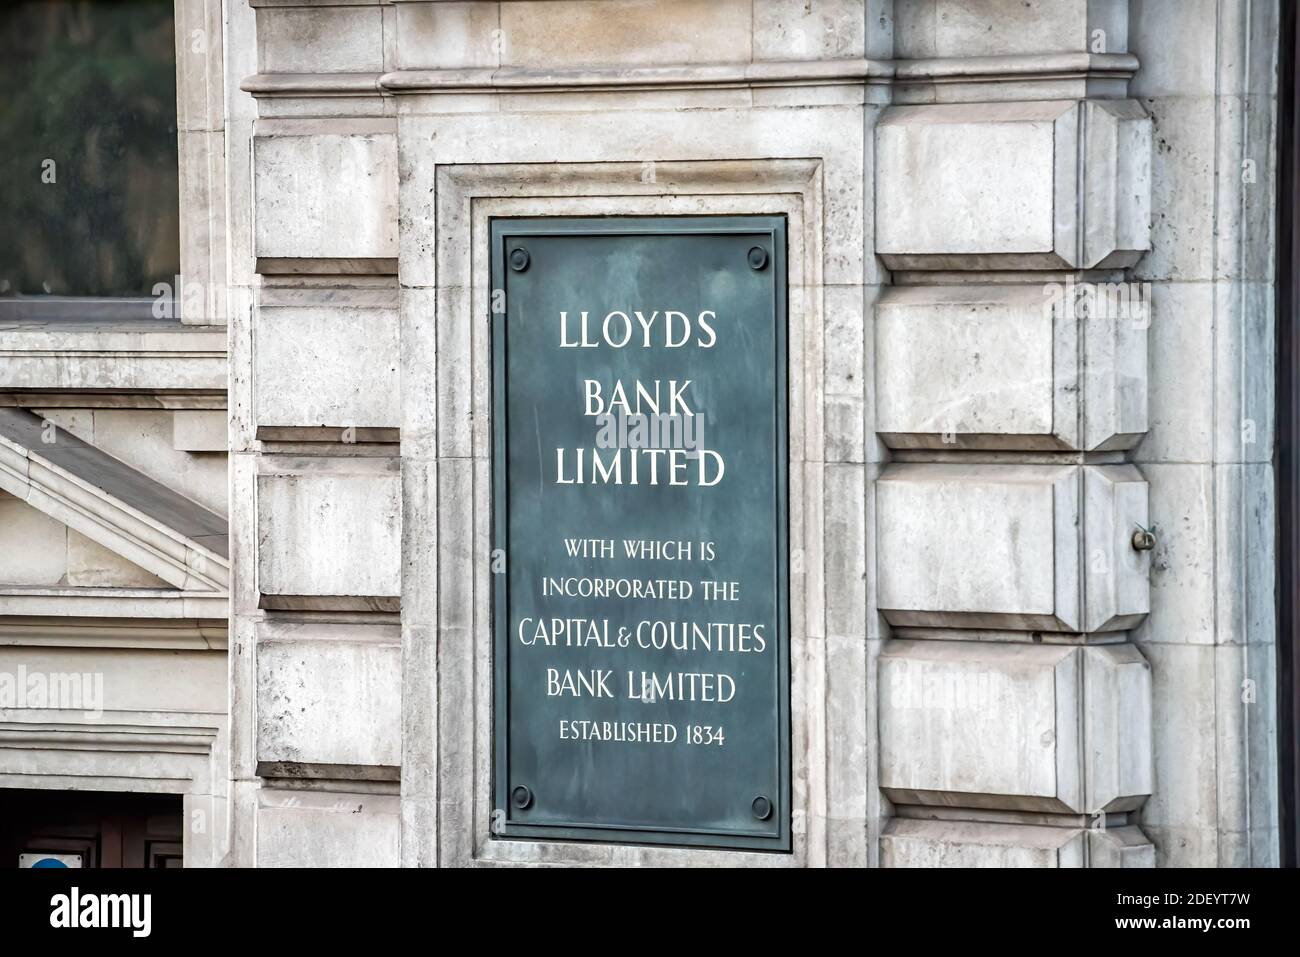 London, UK - June 22, 2018: Closeup of Lloyds Bank sign branch office in downtown city in England with text for limited incorporated capital of counti Stock Photo